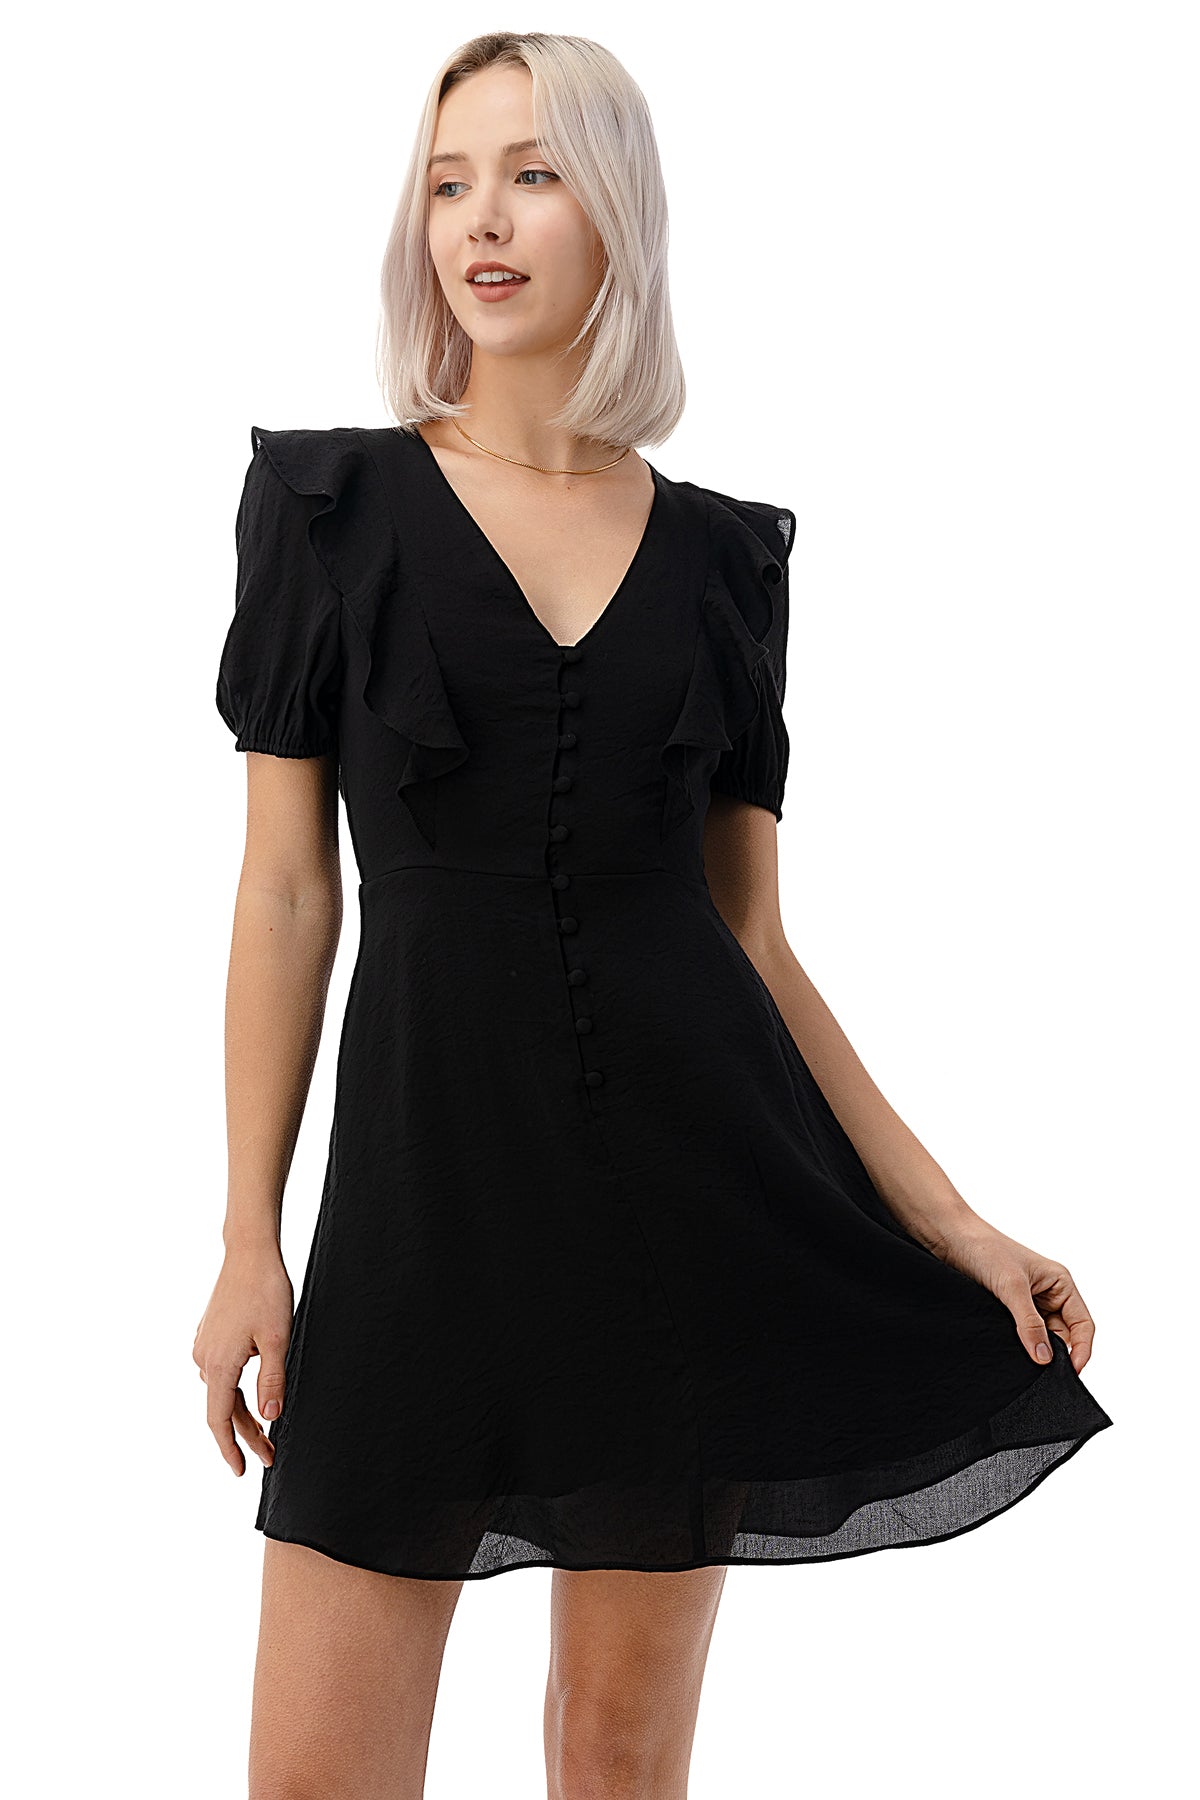 EDGY Land Girl's and Women's Button Down V-Neck Short Sleeve Ruffled Above-Knee A-Line Party Dress